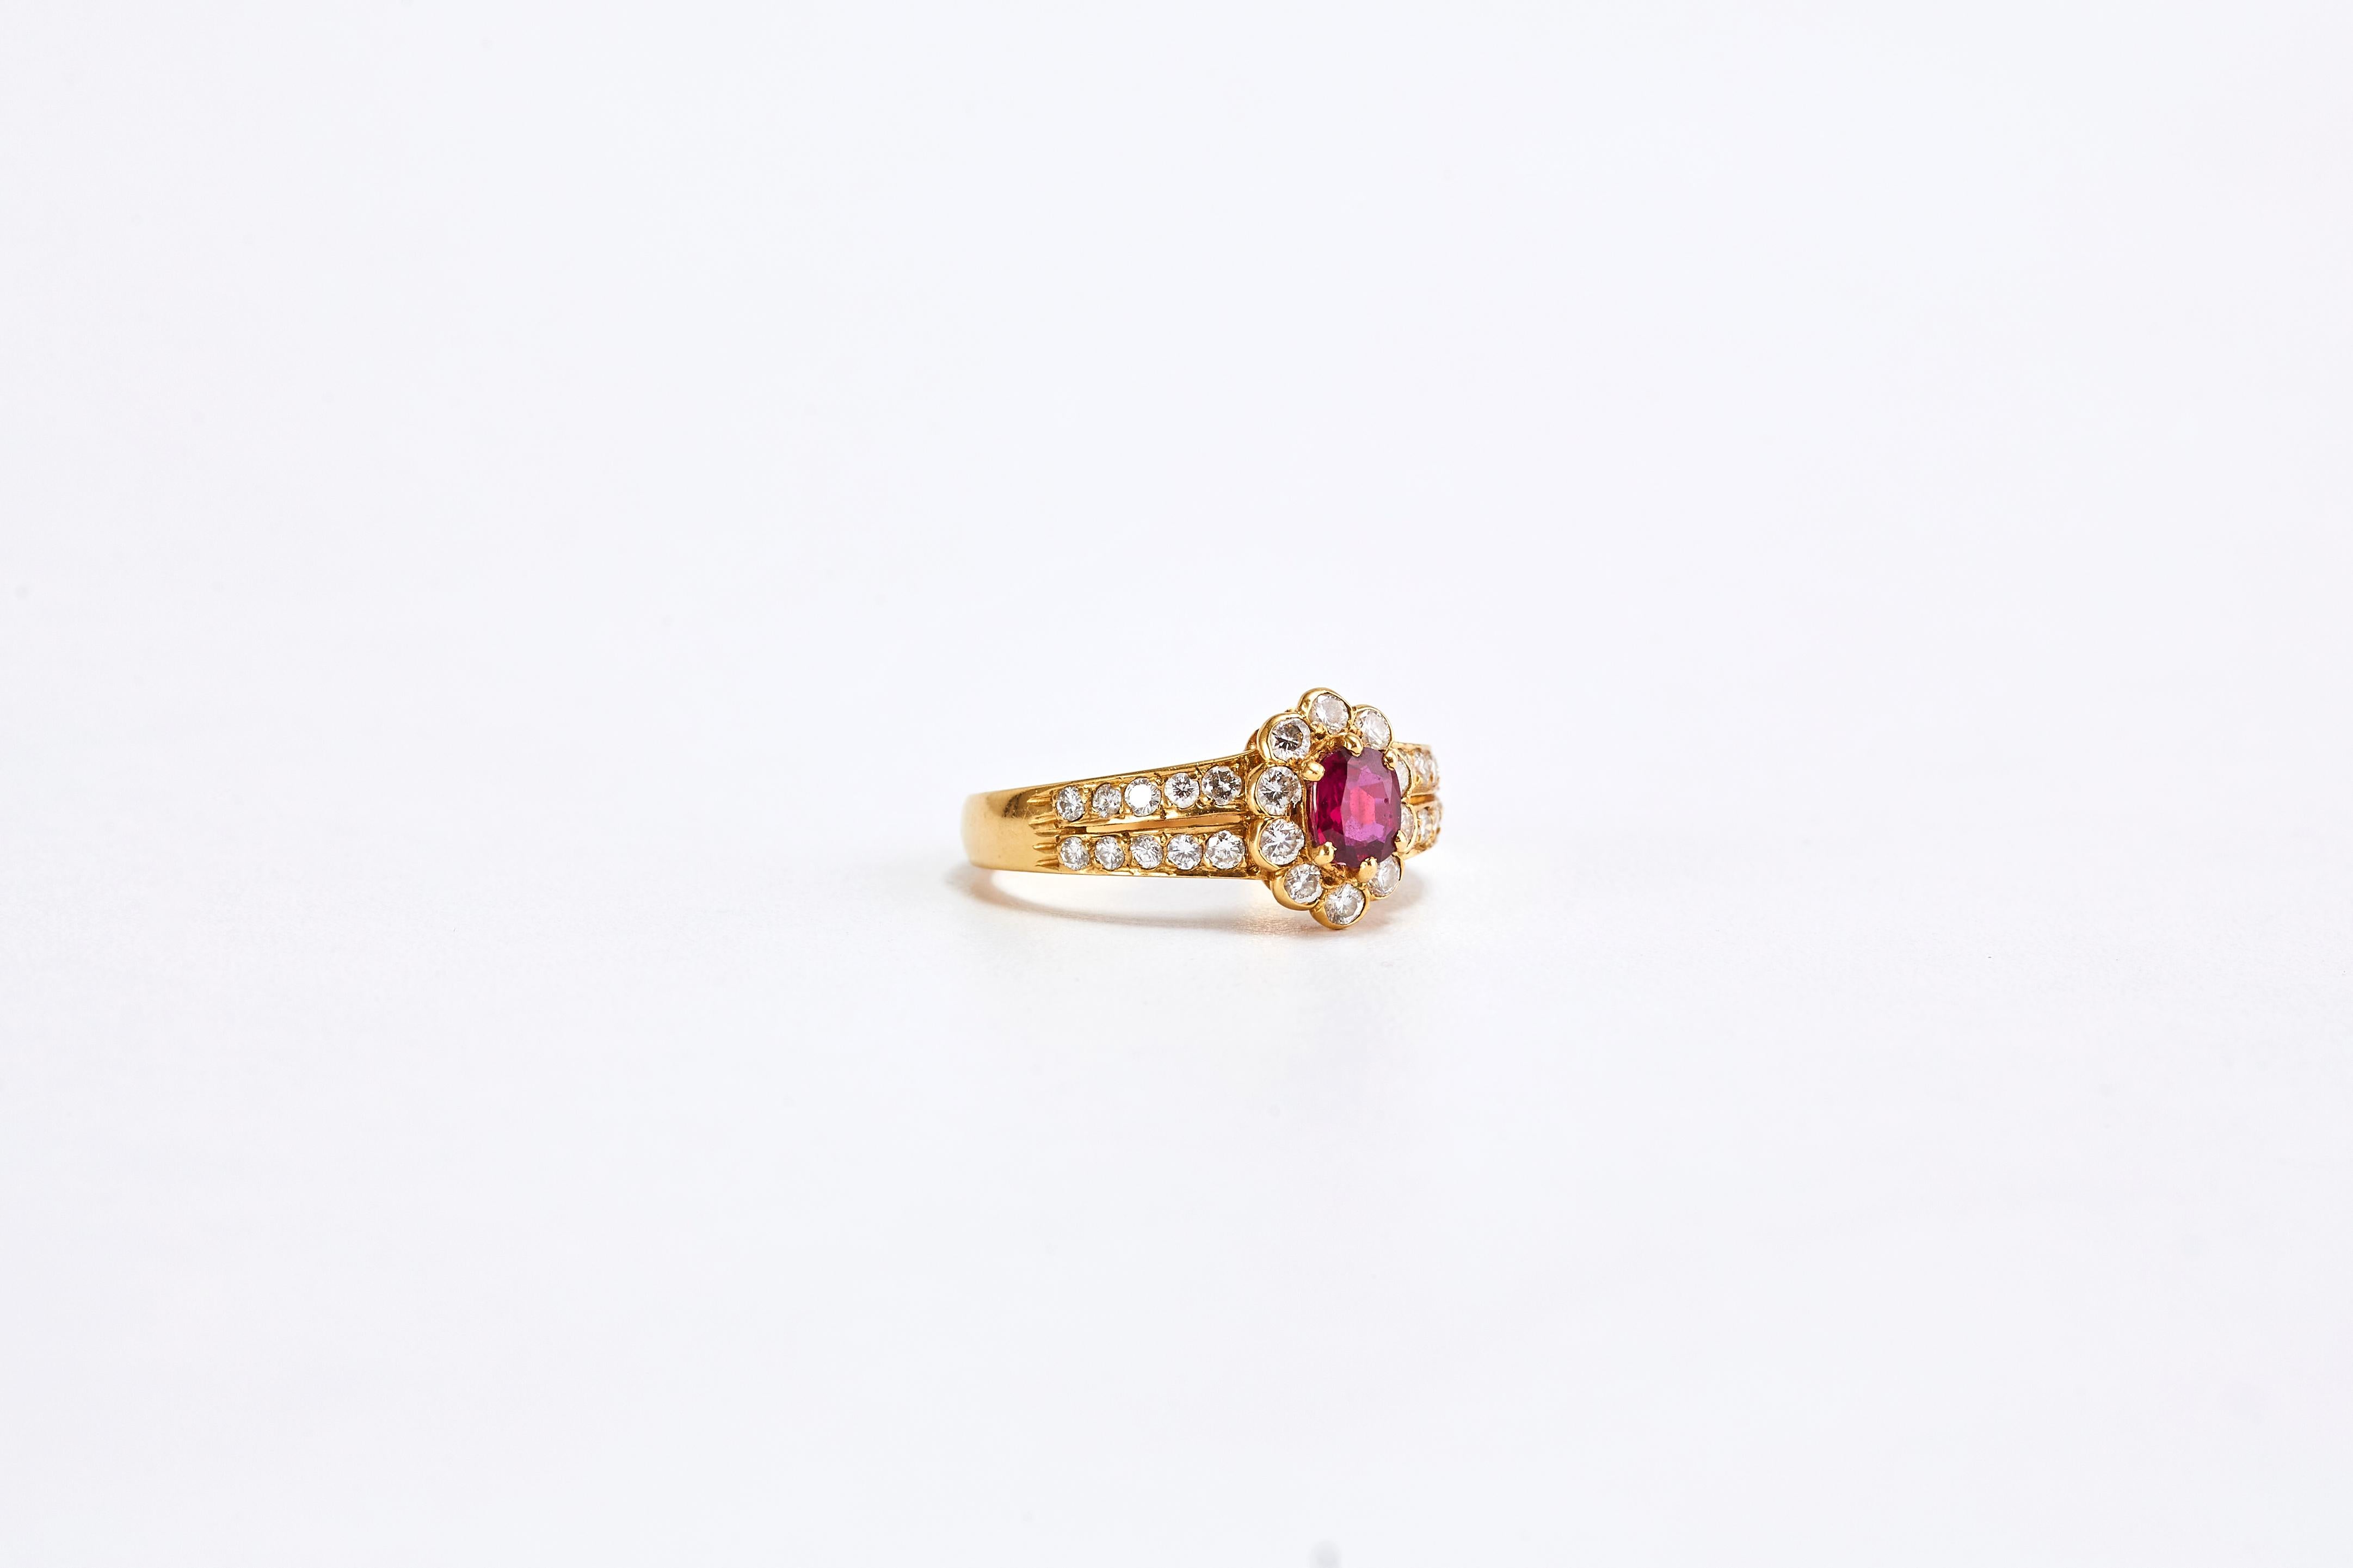 18k Yellow Gold Ruby and Diamond Ring

Gorgeous gold ring with a center stone ruby and side diamonds. Made in France in the 60s.
Ruby is oval cut 0.50 carat, Diamonds are a total of 1.10 carat.

Total Weight: 4.1 grams. Size: 6.5 US